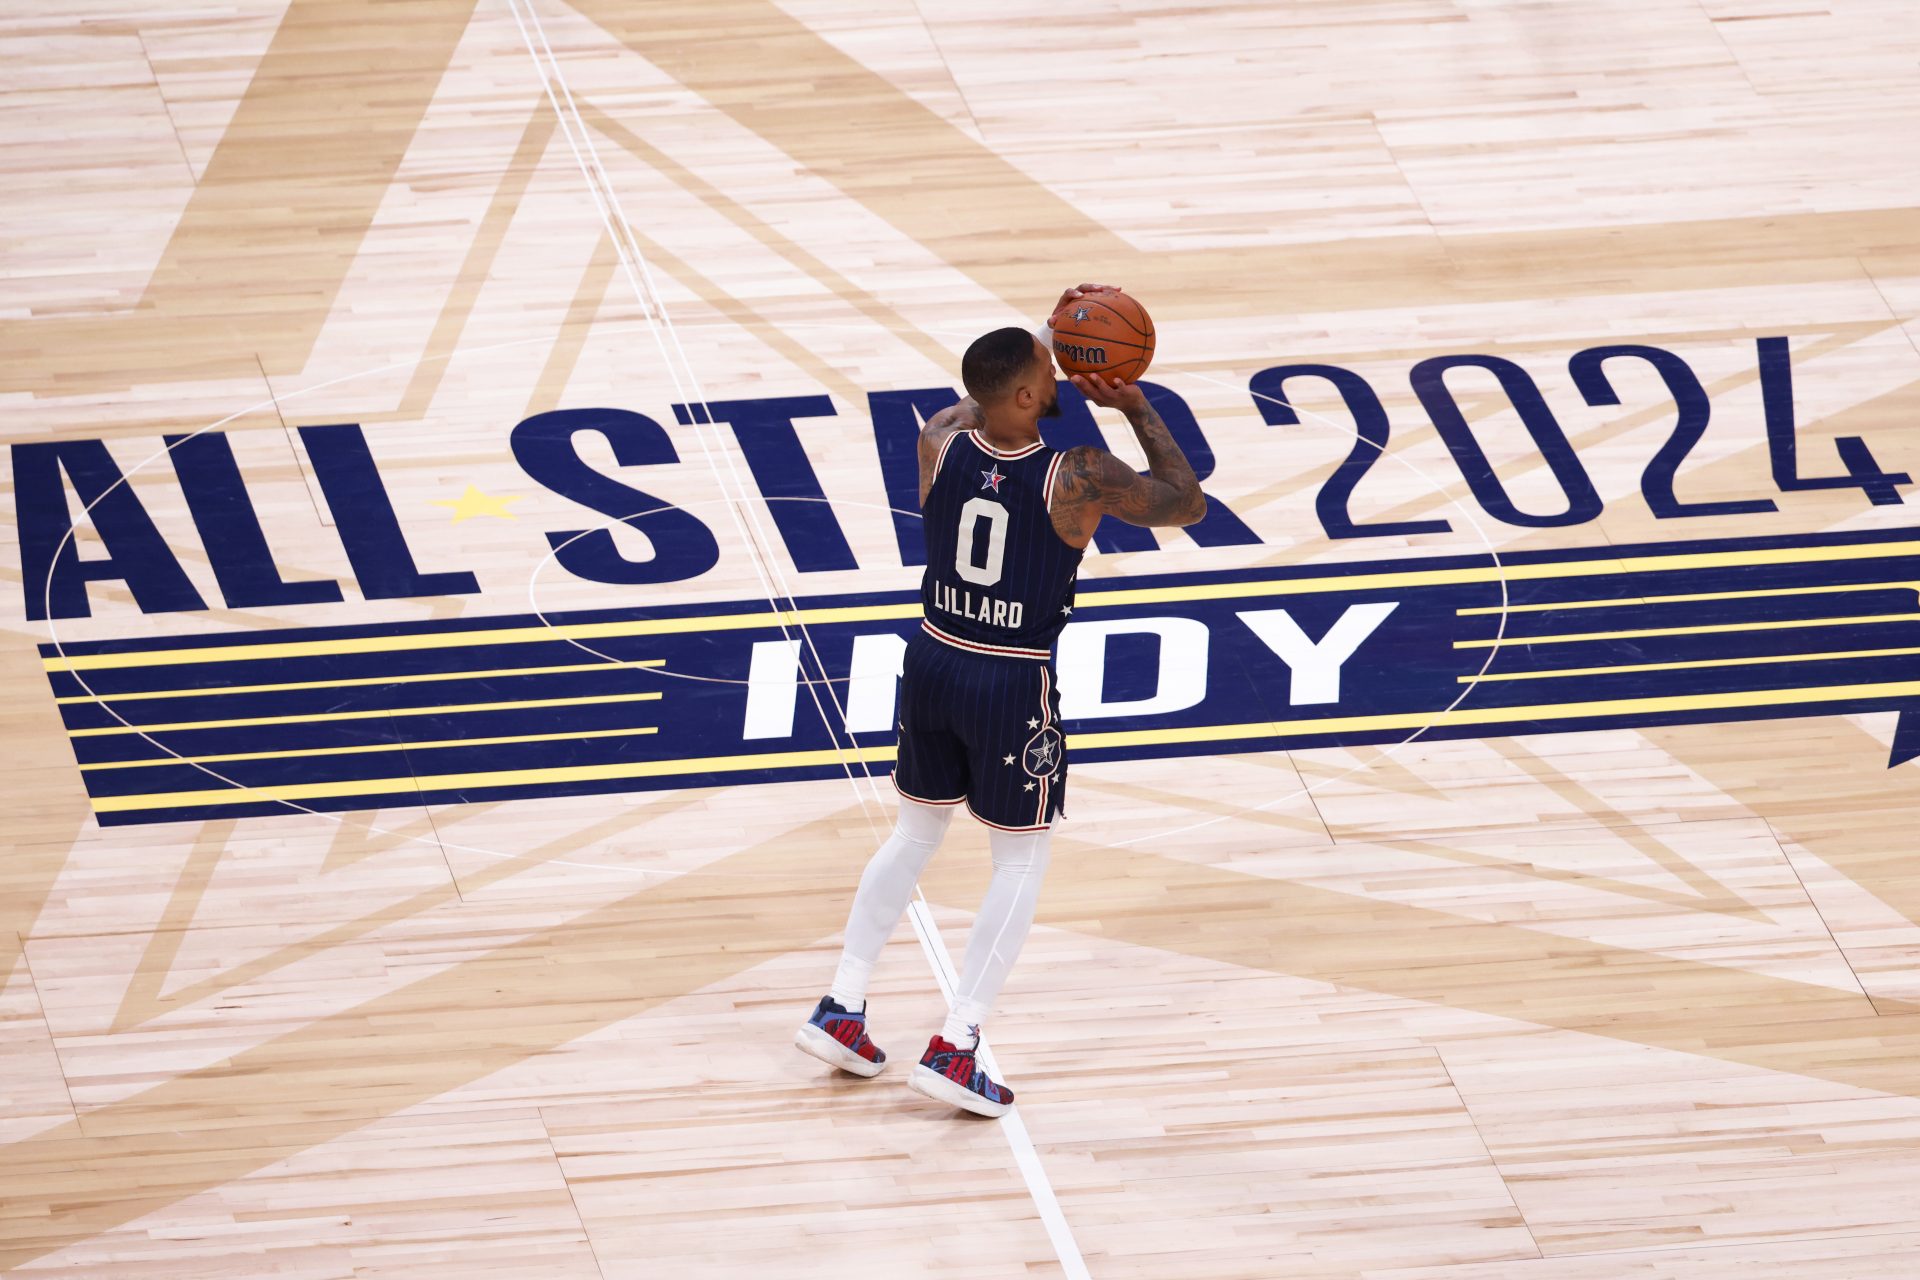 Should the NBA All-Star game be abolished for good?